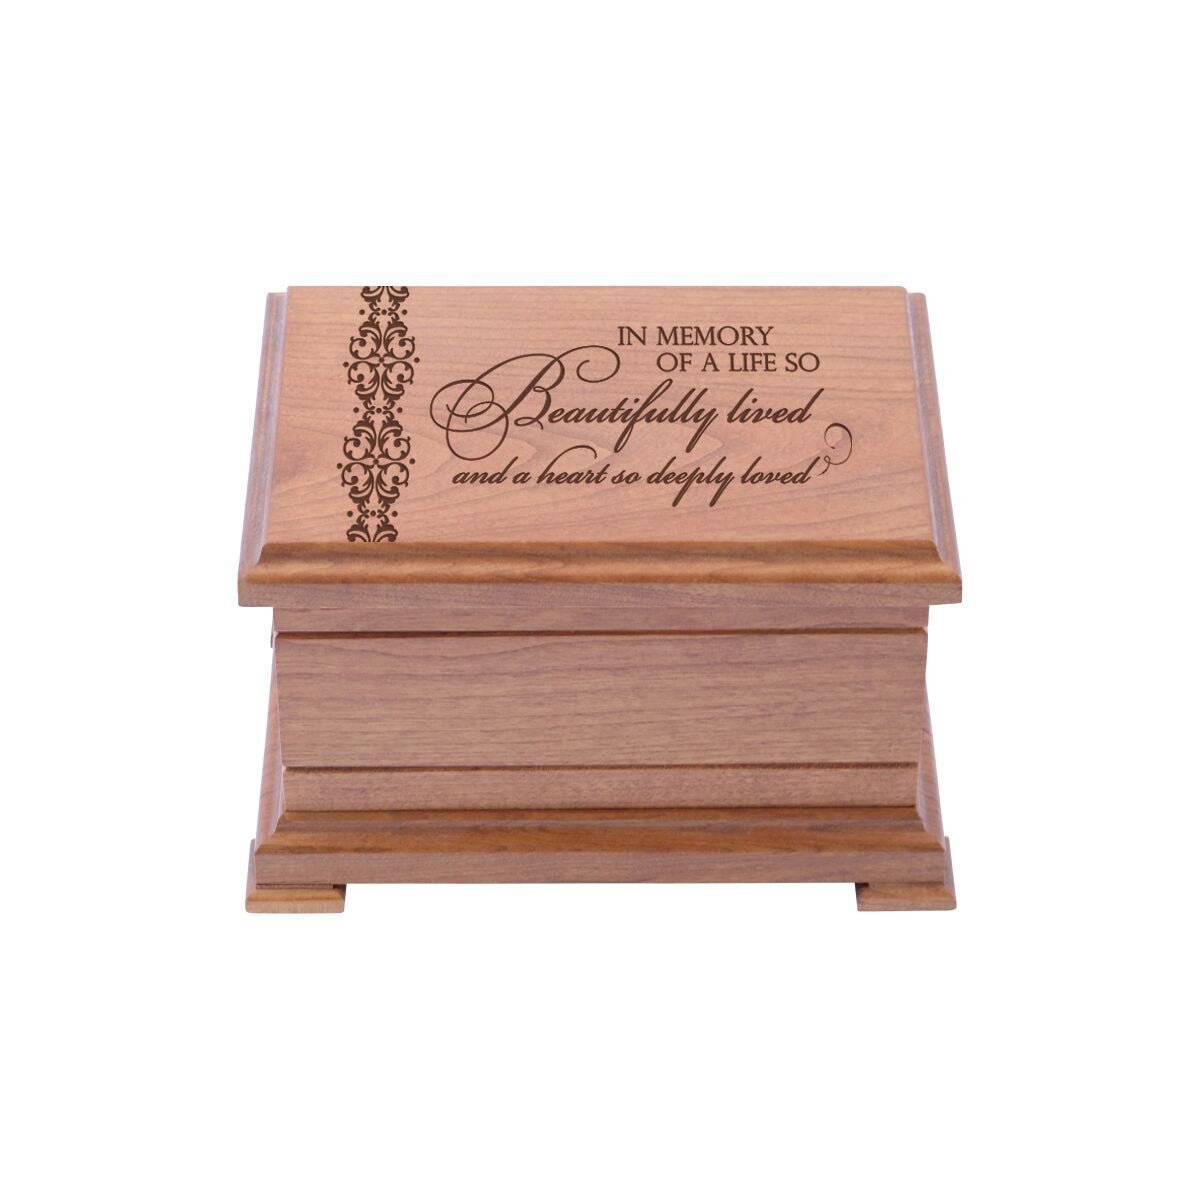 Engraved Wooden Urn Box for Human Ashes 9.75" x 7.75" x 4.25" holds 210 cu in In Memory Of A Life - LifeSong Milestones